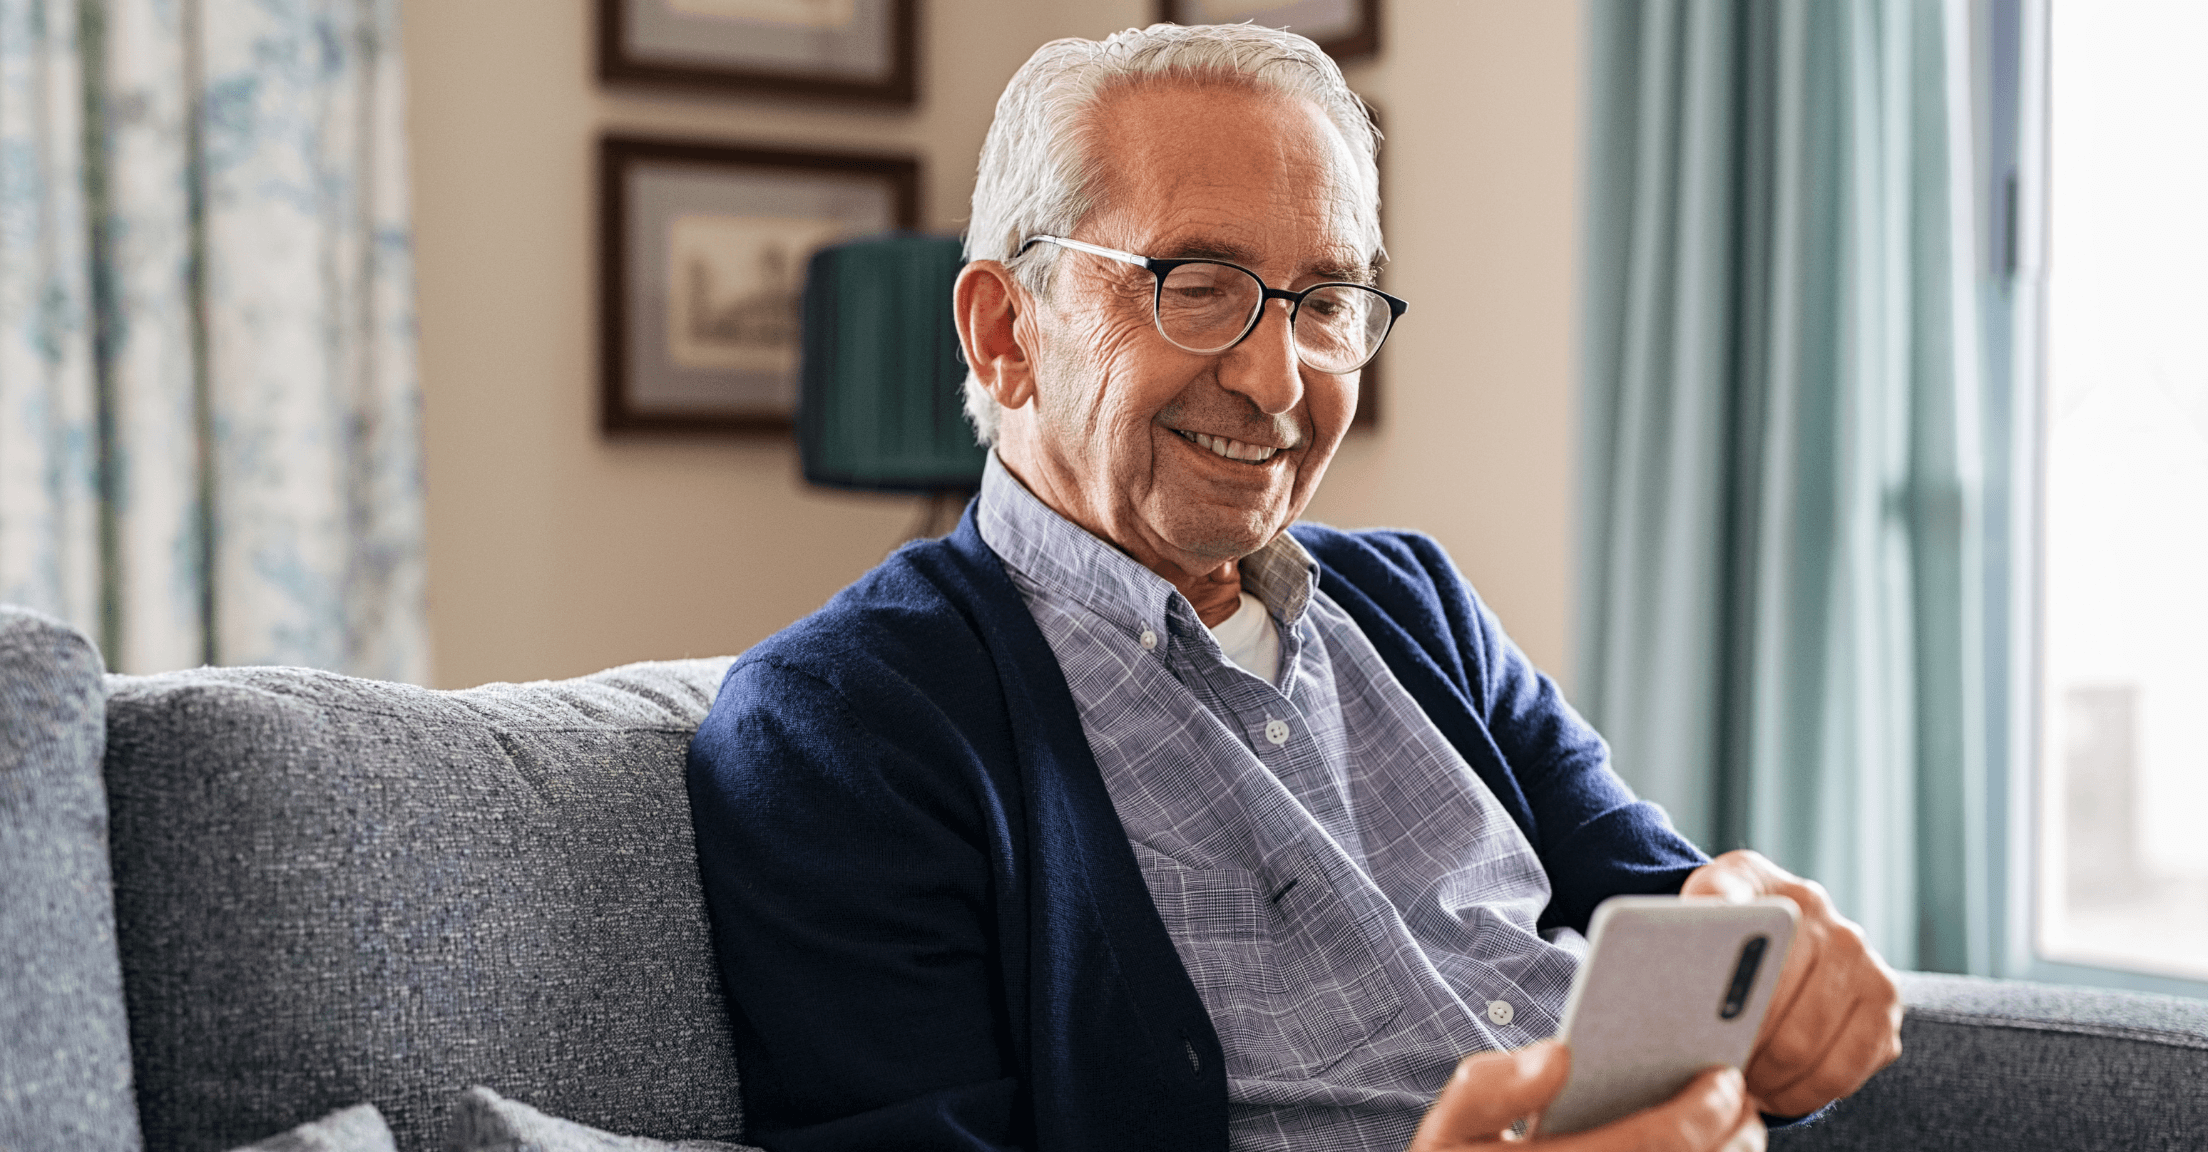 Man sitting on couch looking at a financial planning software client mobile app on his phone